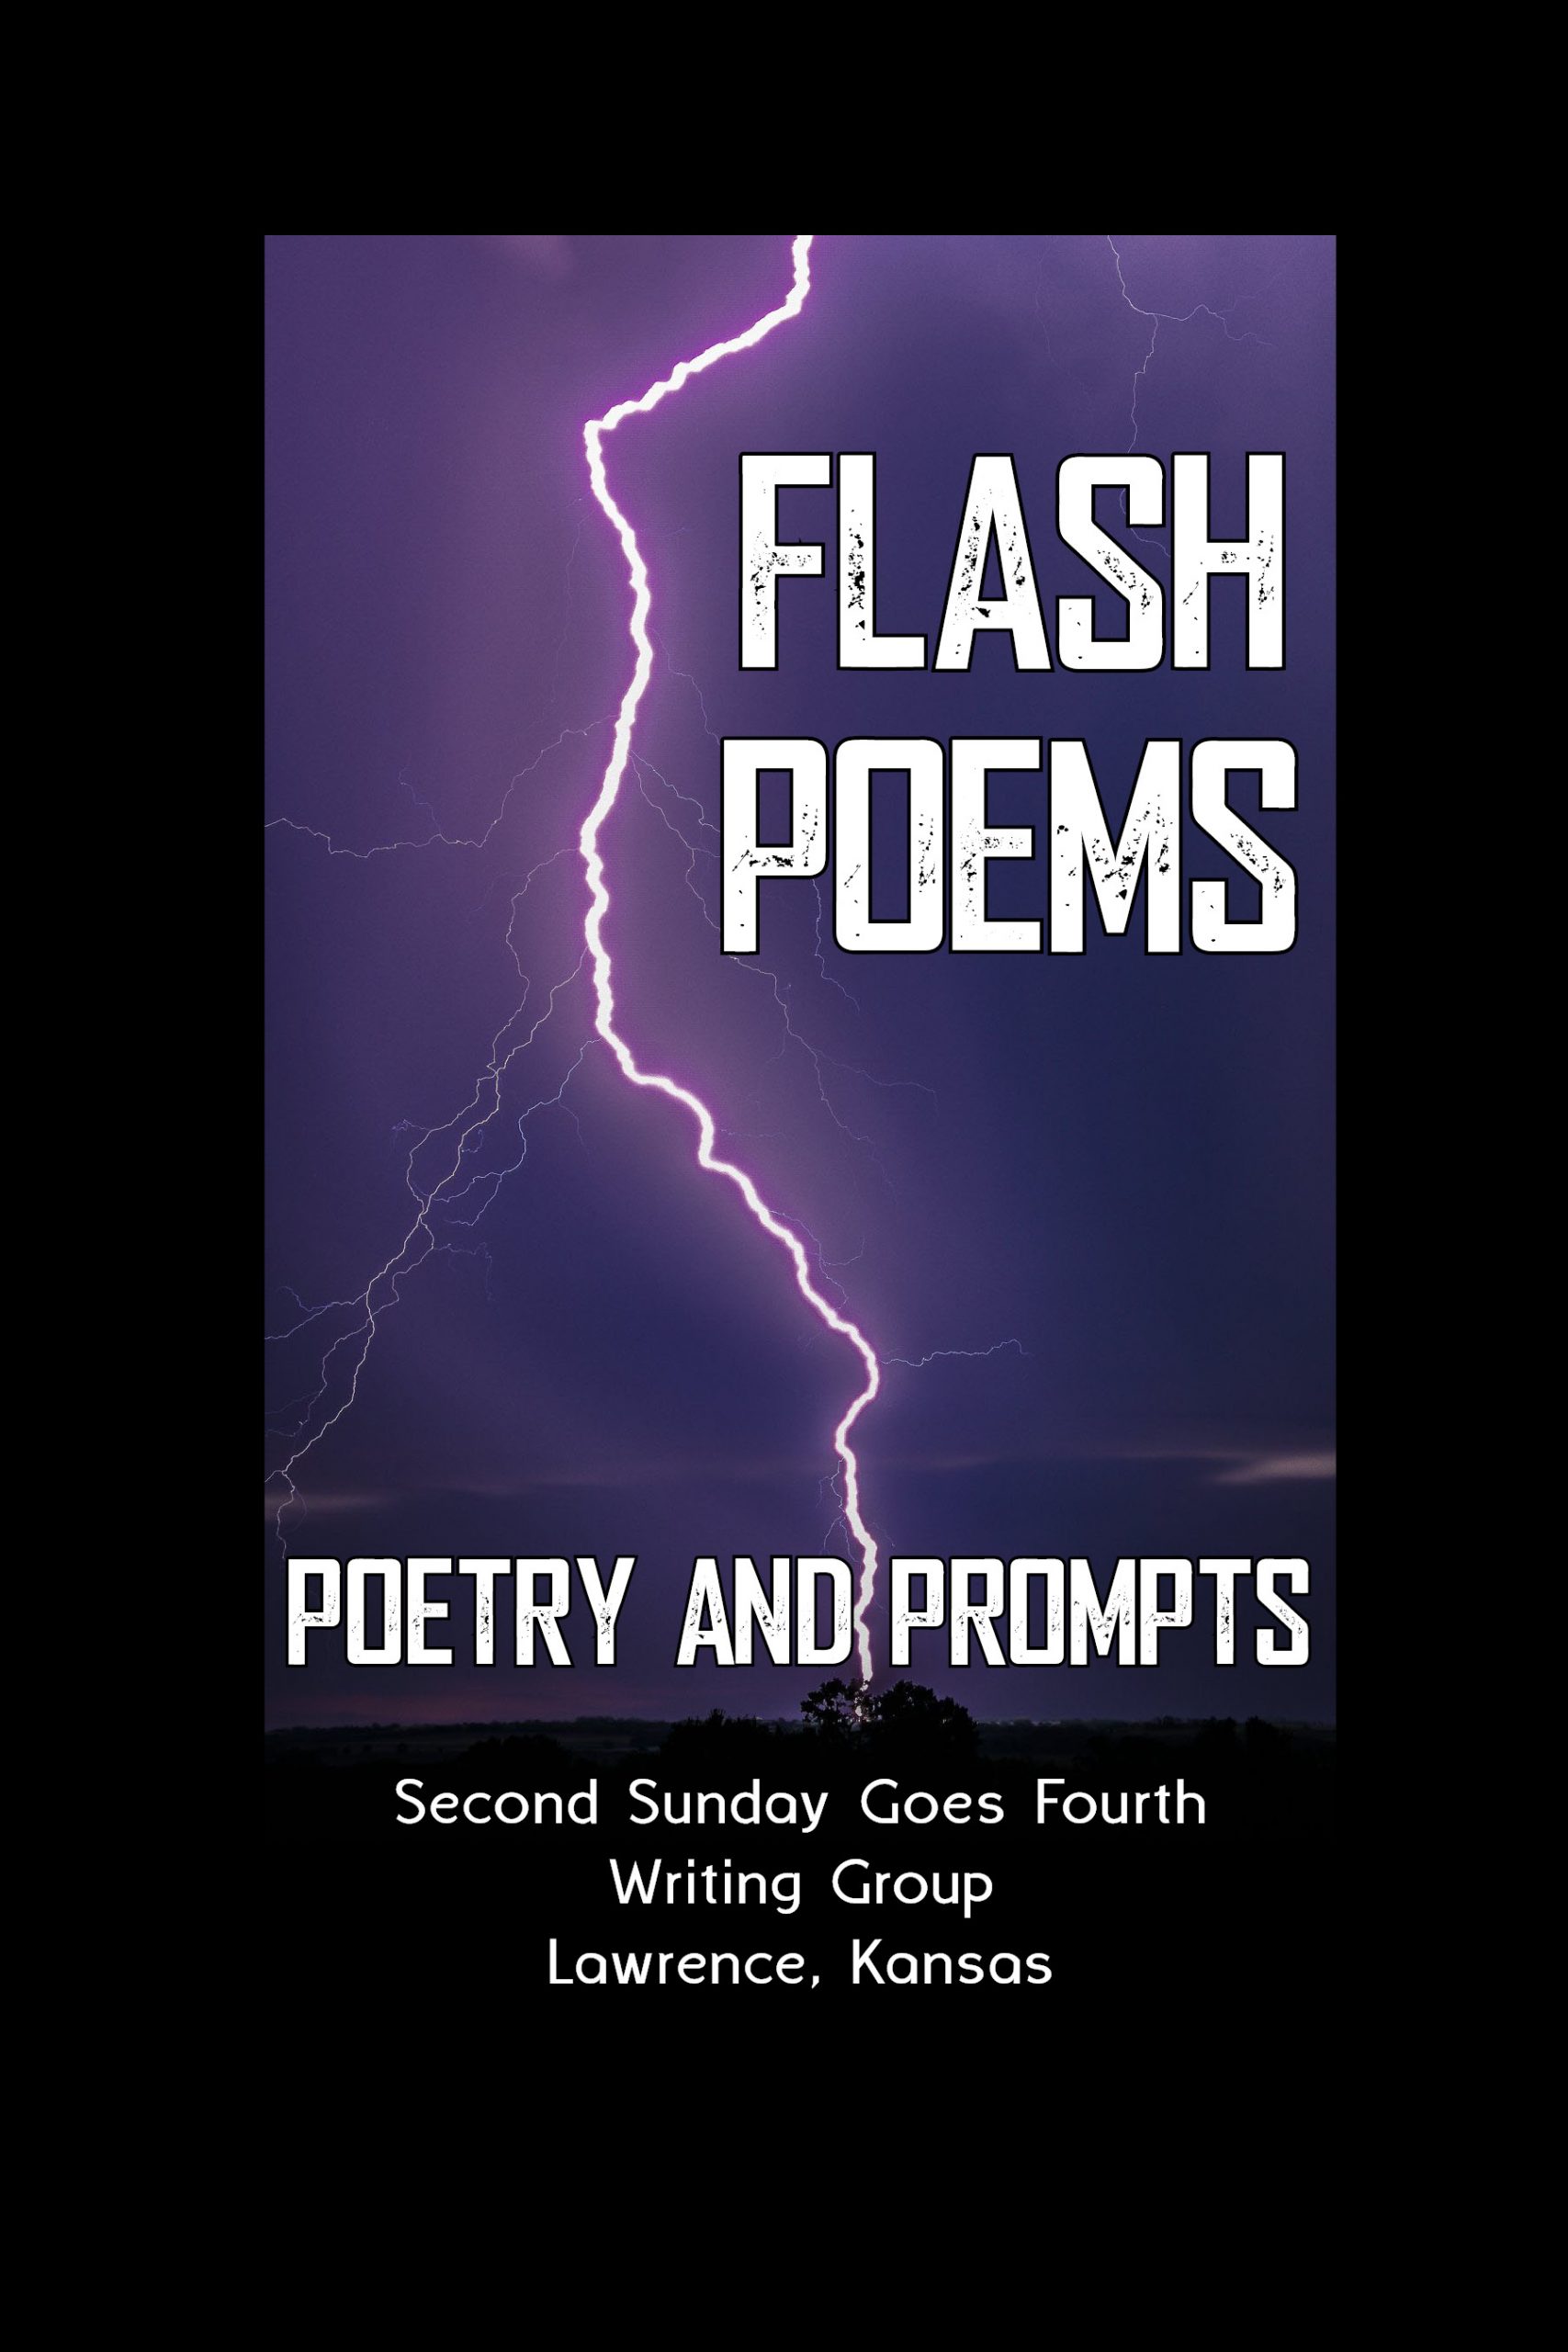 FLASH POEMS: POETRY & PROMPTS, Second Sunday Goes Fourth Writing Group Lawrence, Kansas